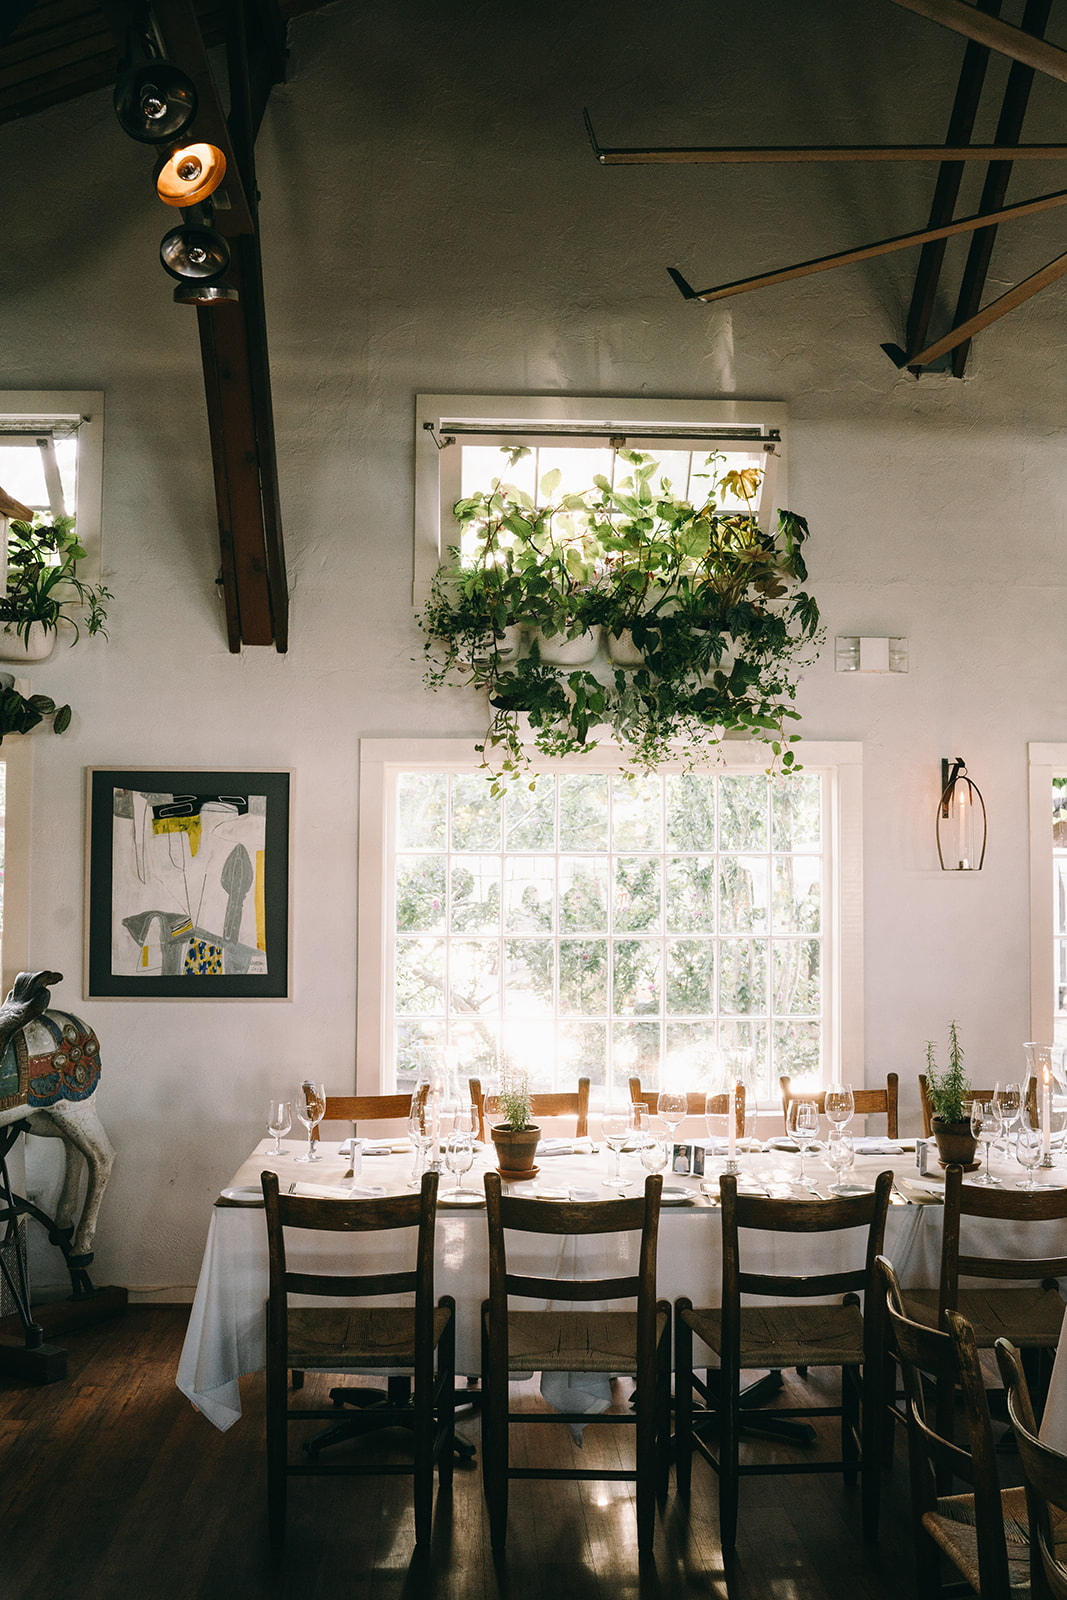 Sunshine pouring onto a table with plants growing above the table